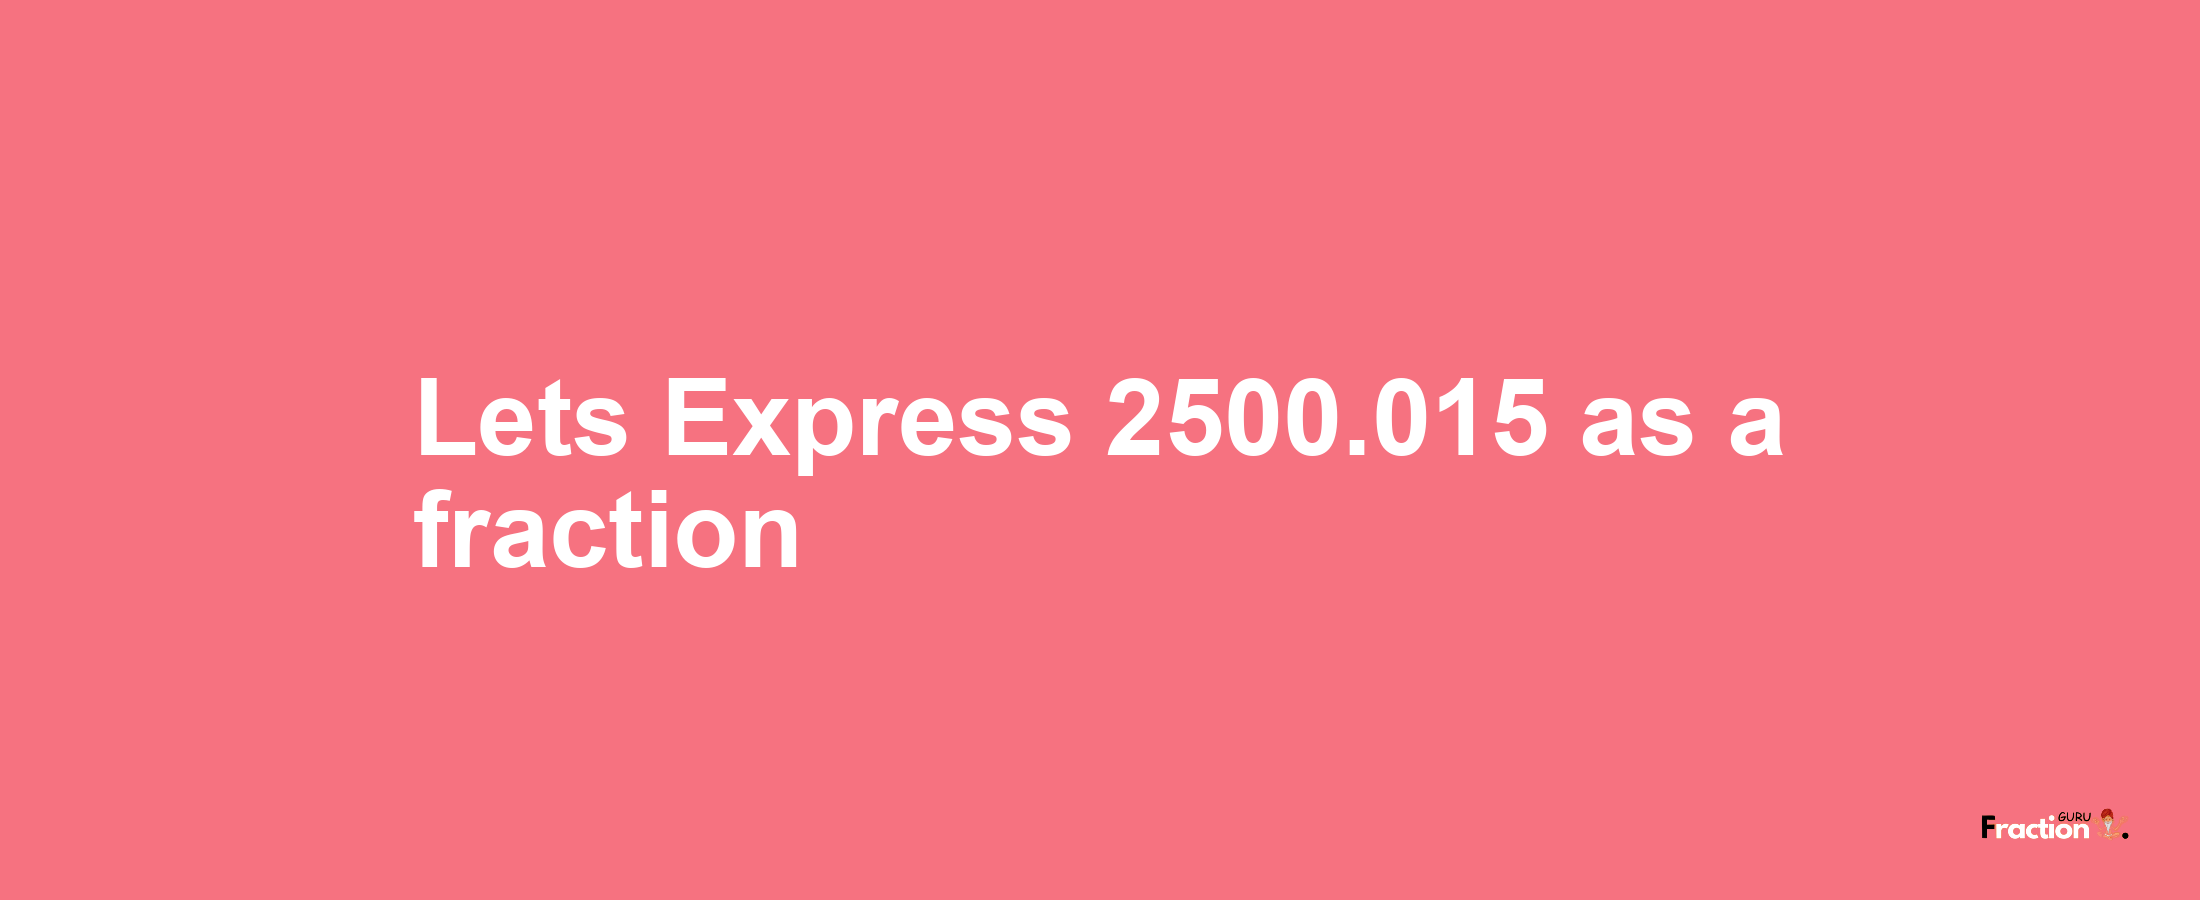 Lets Express 2500.015 as afraction